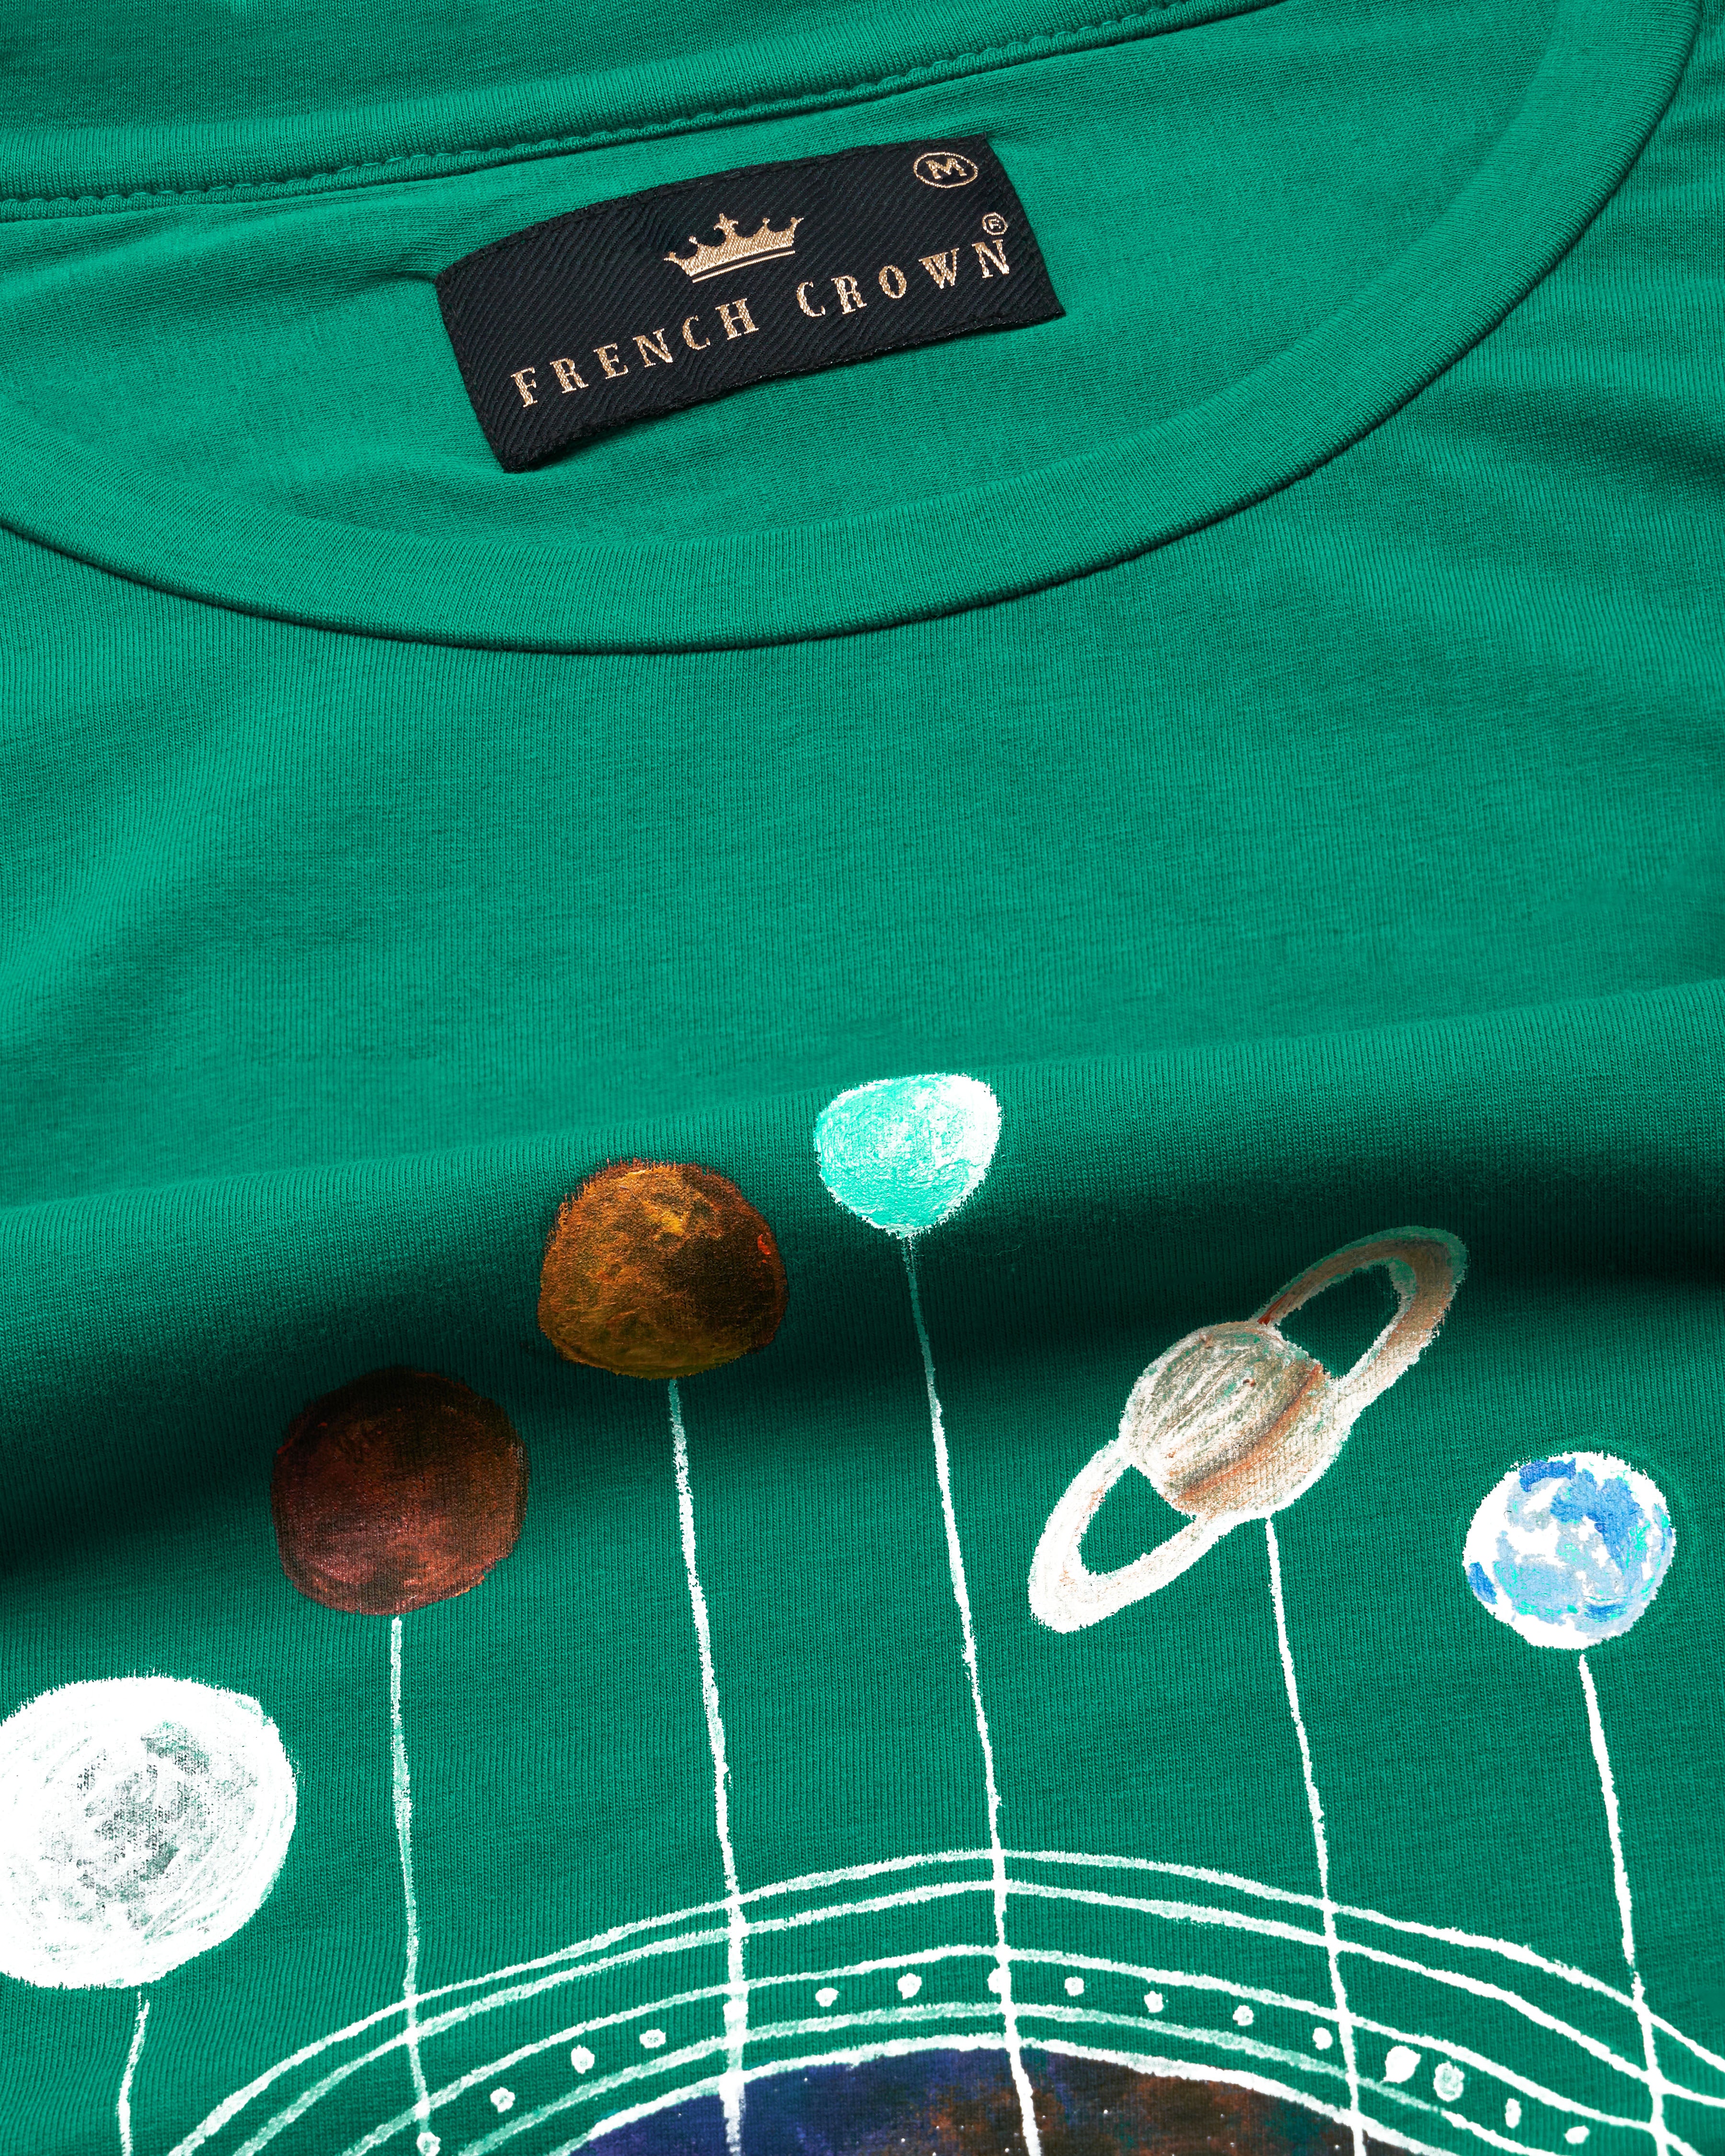 Tropical Green with Planets Hand Painted Premium Cotton T-shirt TS005-W012-S, TS005-W012-M, TS005-W012-L, TS005-W012-XL, TS005-W012-XXL